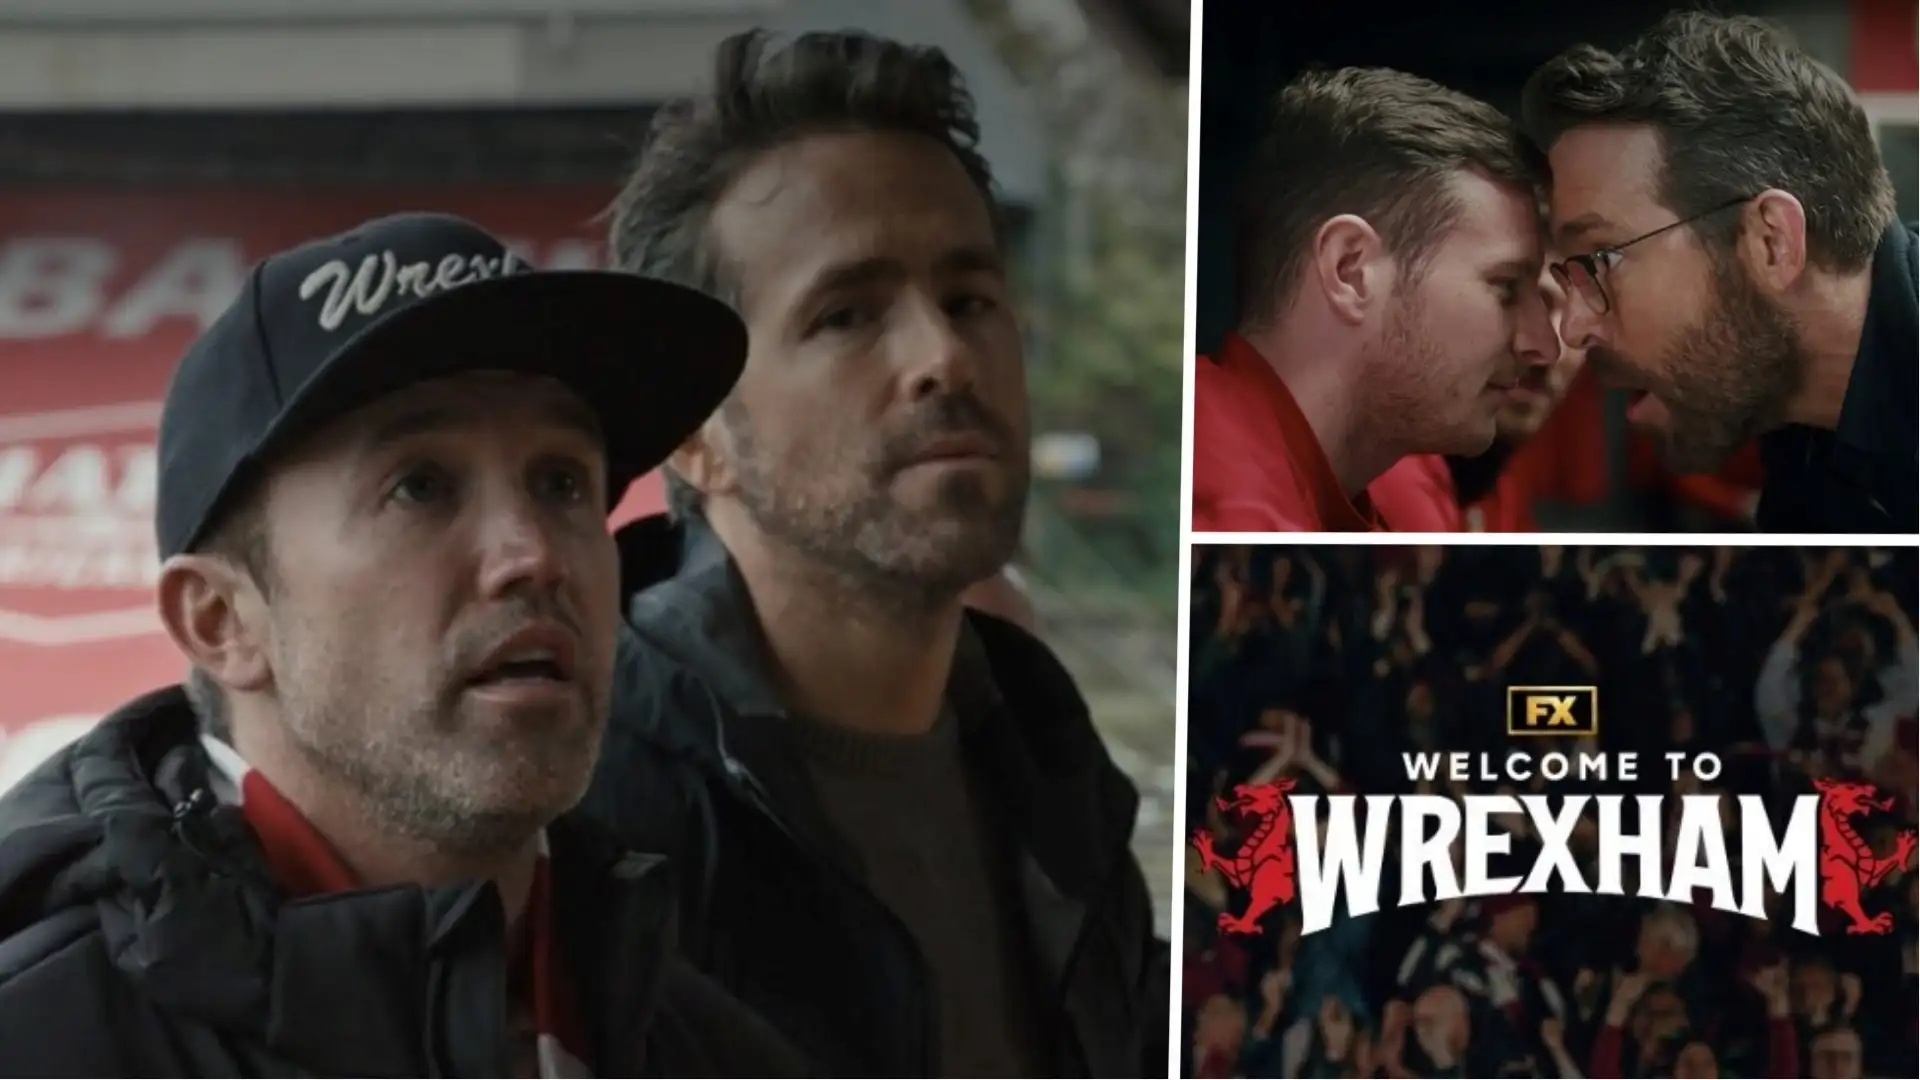 Revealed: Ryan Reynolds & Rob McElhenney plan big change for ‘Welcome to Wrexham’ that could see award-winning documentary delivered ‘almost live’